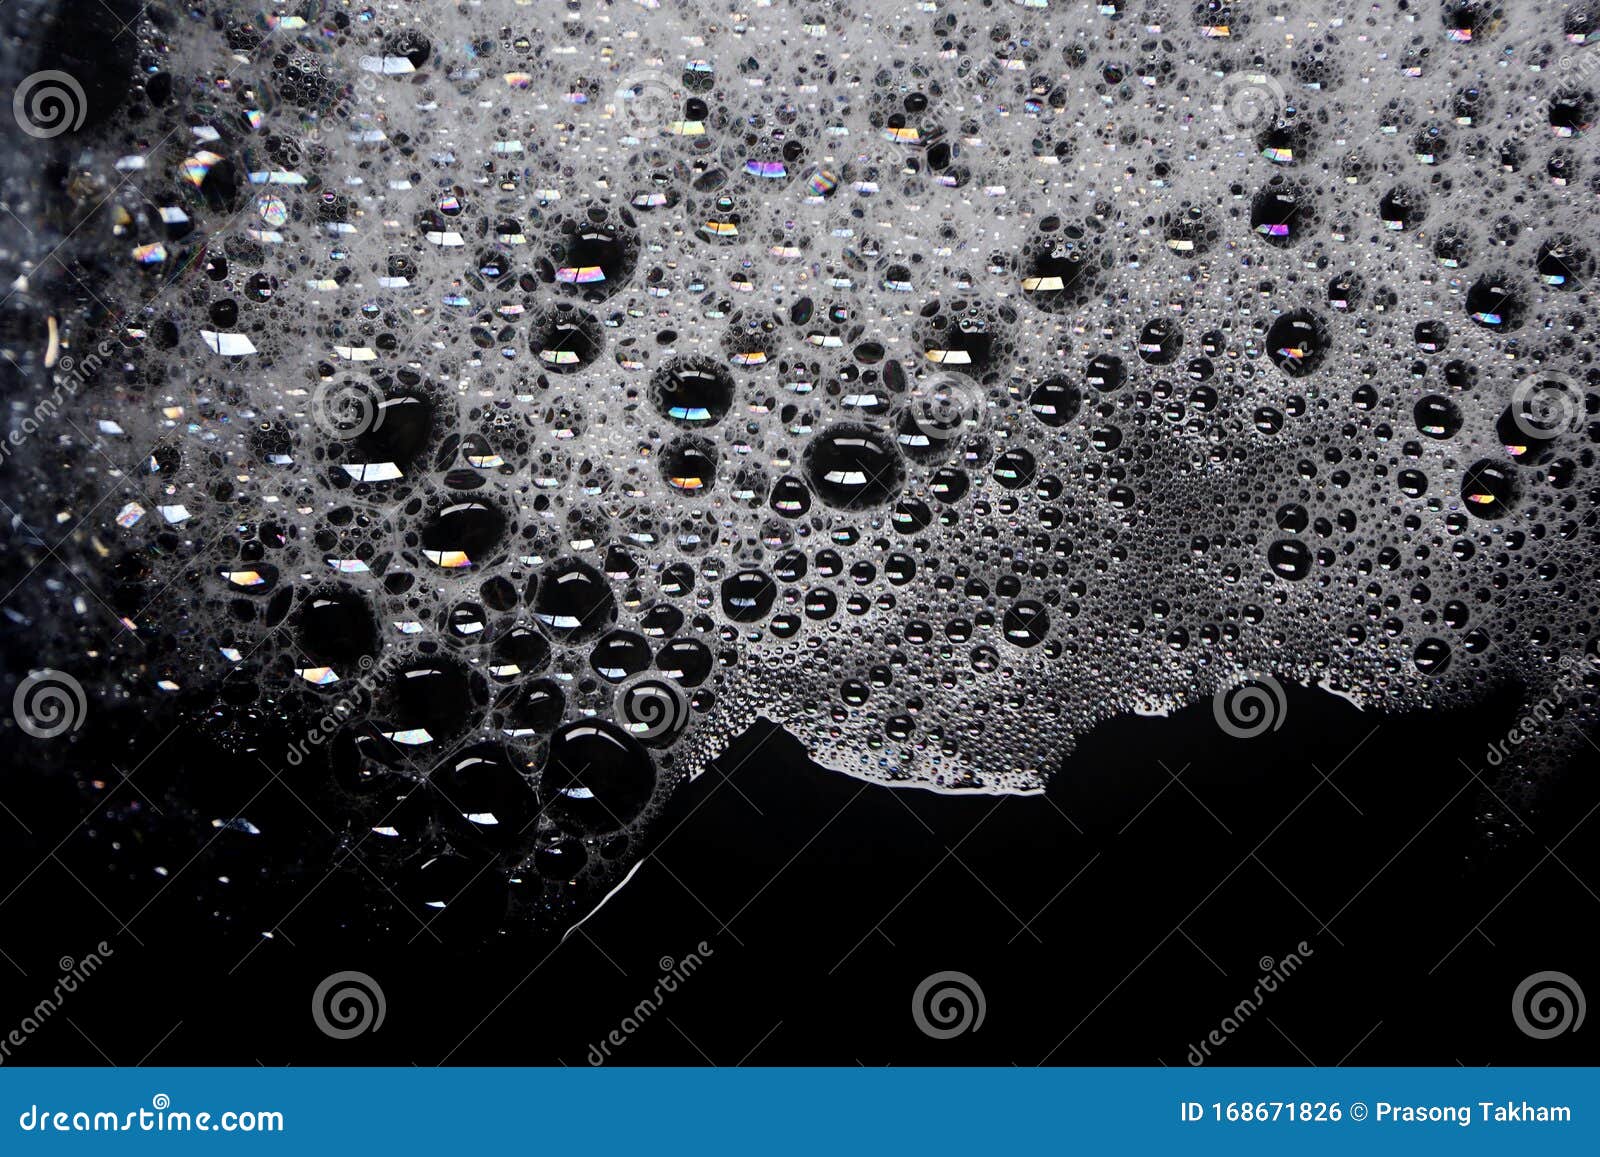 Soap bubbles on a black stock photo. Image of grunge - 168671826